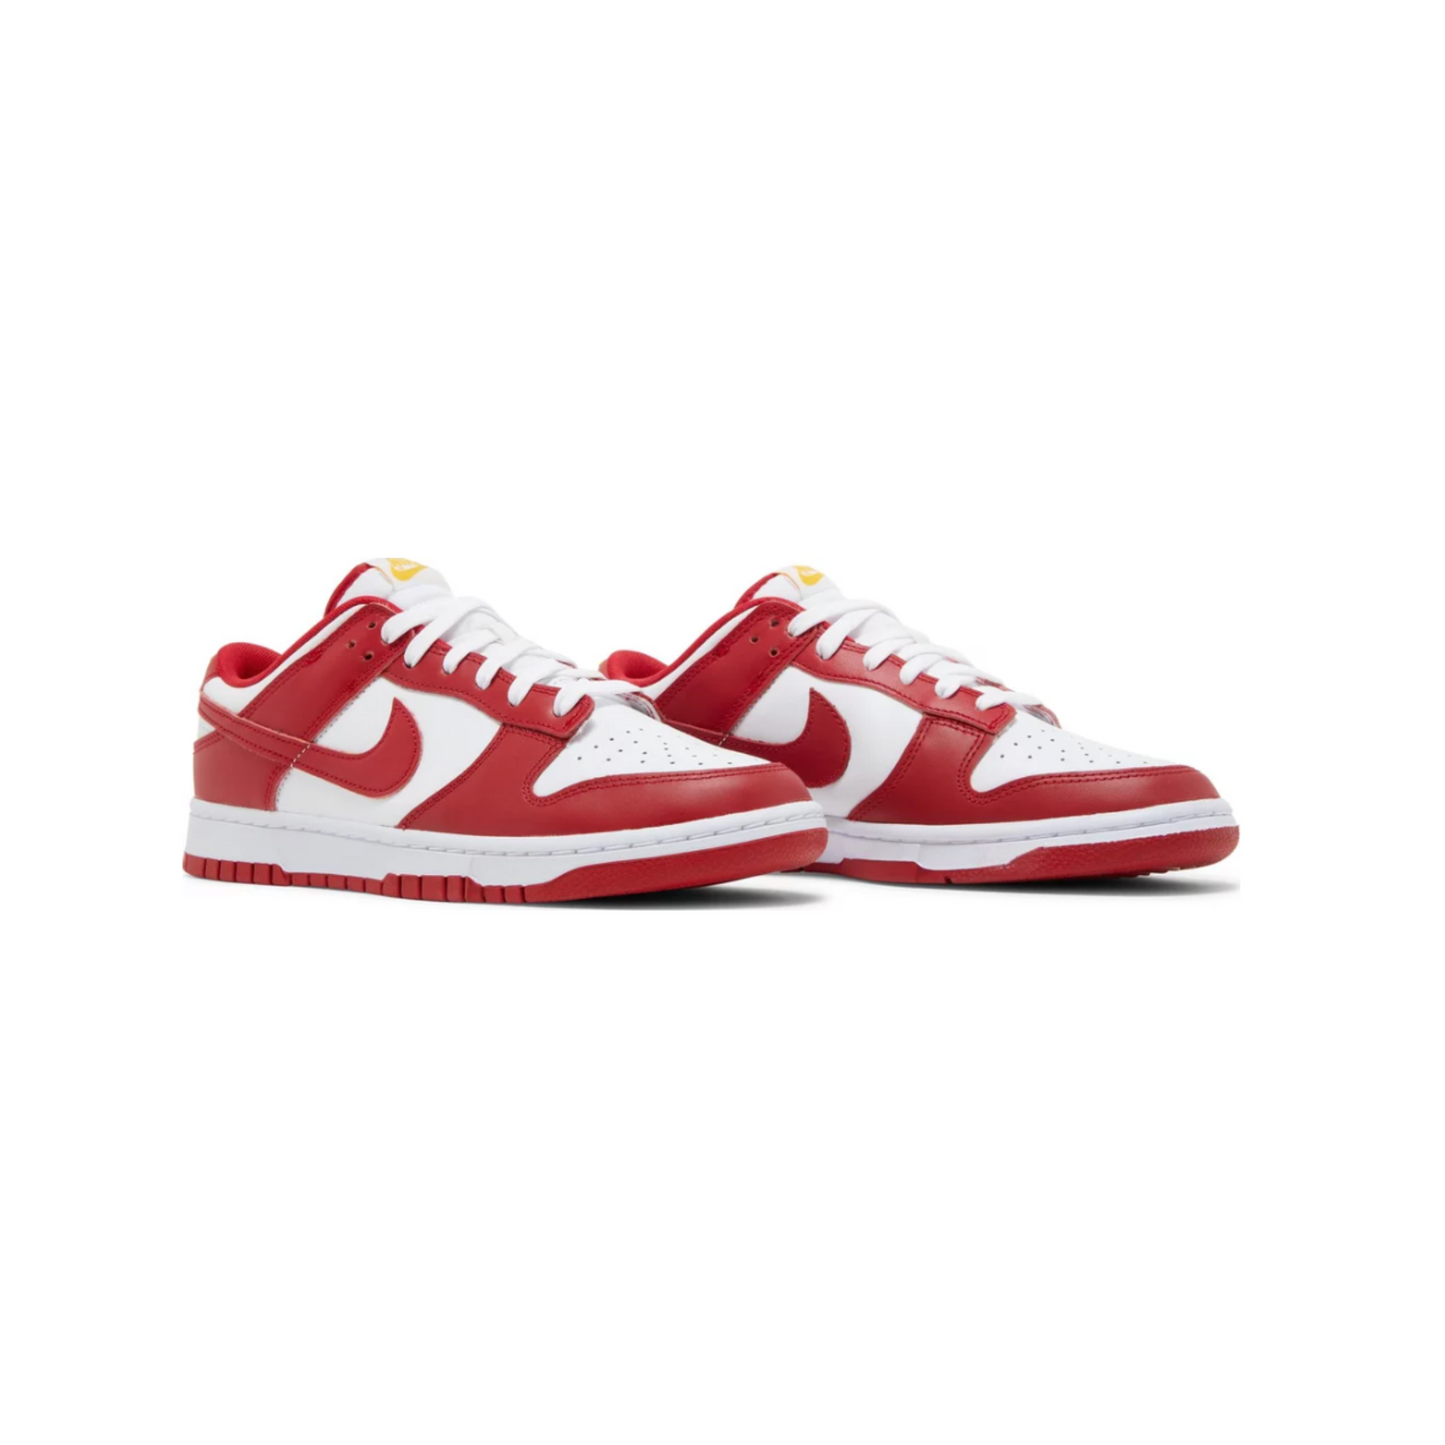 NIKE DUNK LOW 'GYM RED'